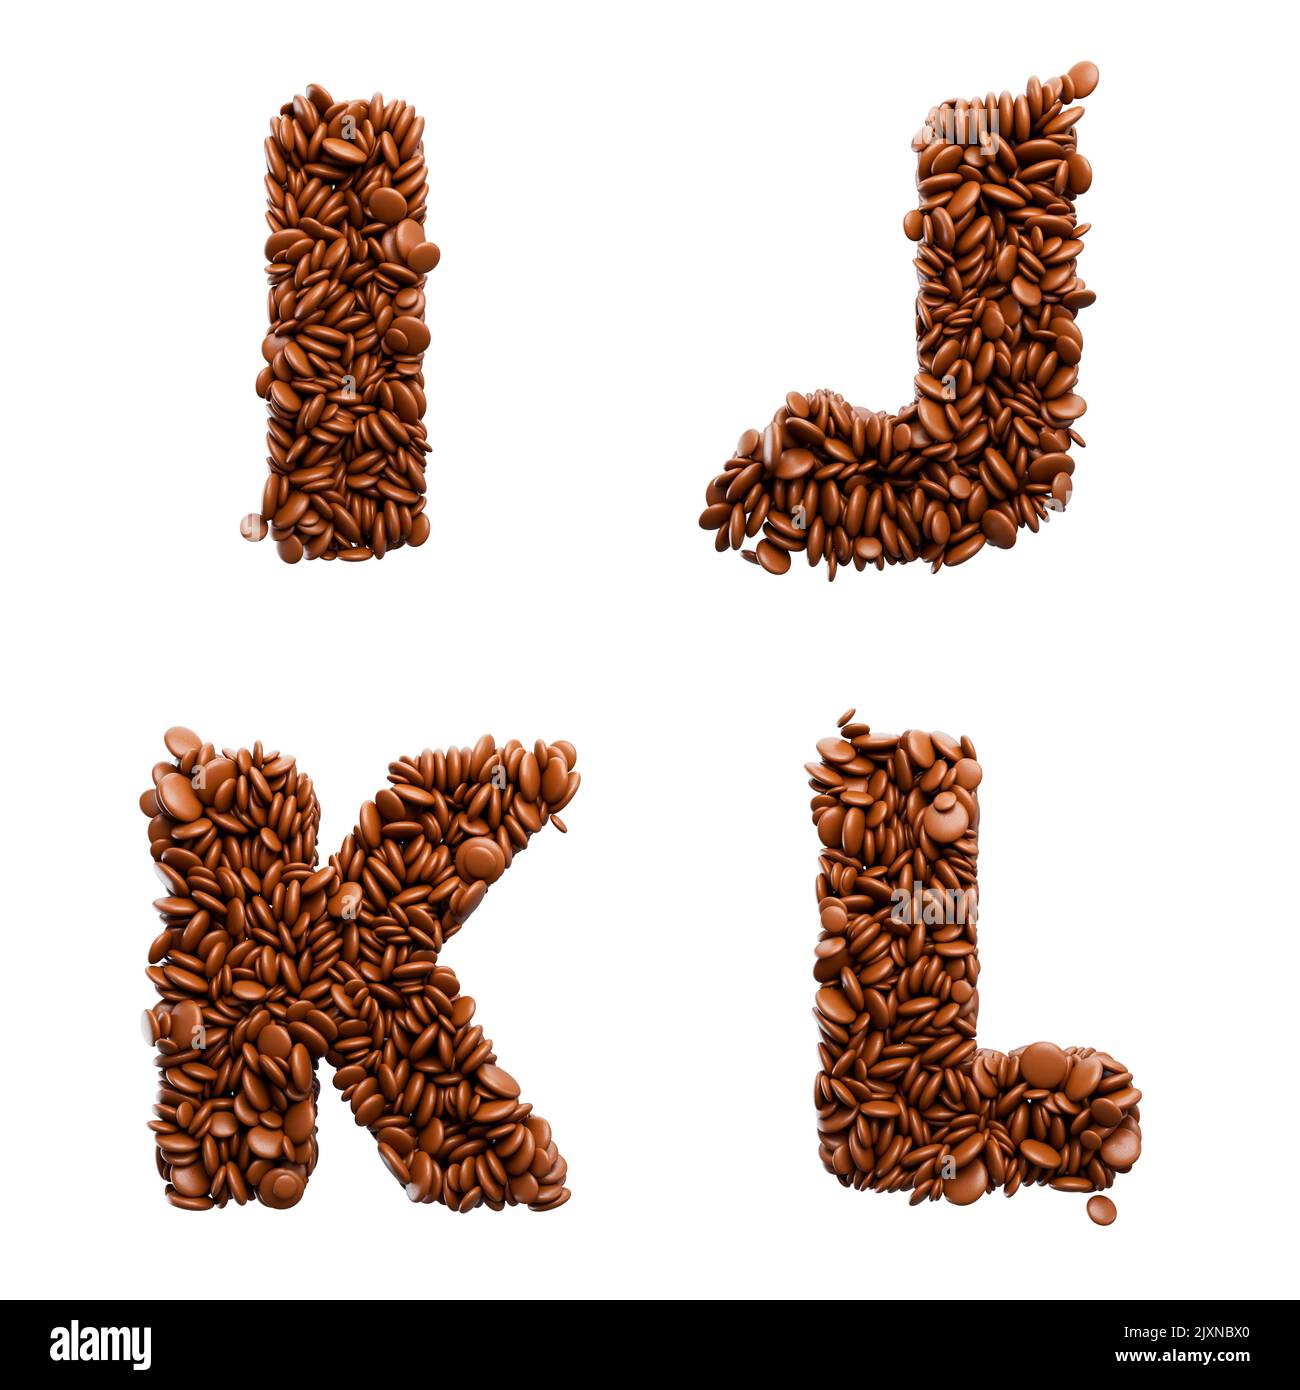 The 3d rendering of letters I J K L made of chocolate candies isolated on white background. Stock Photo